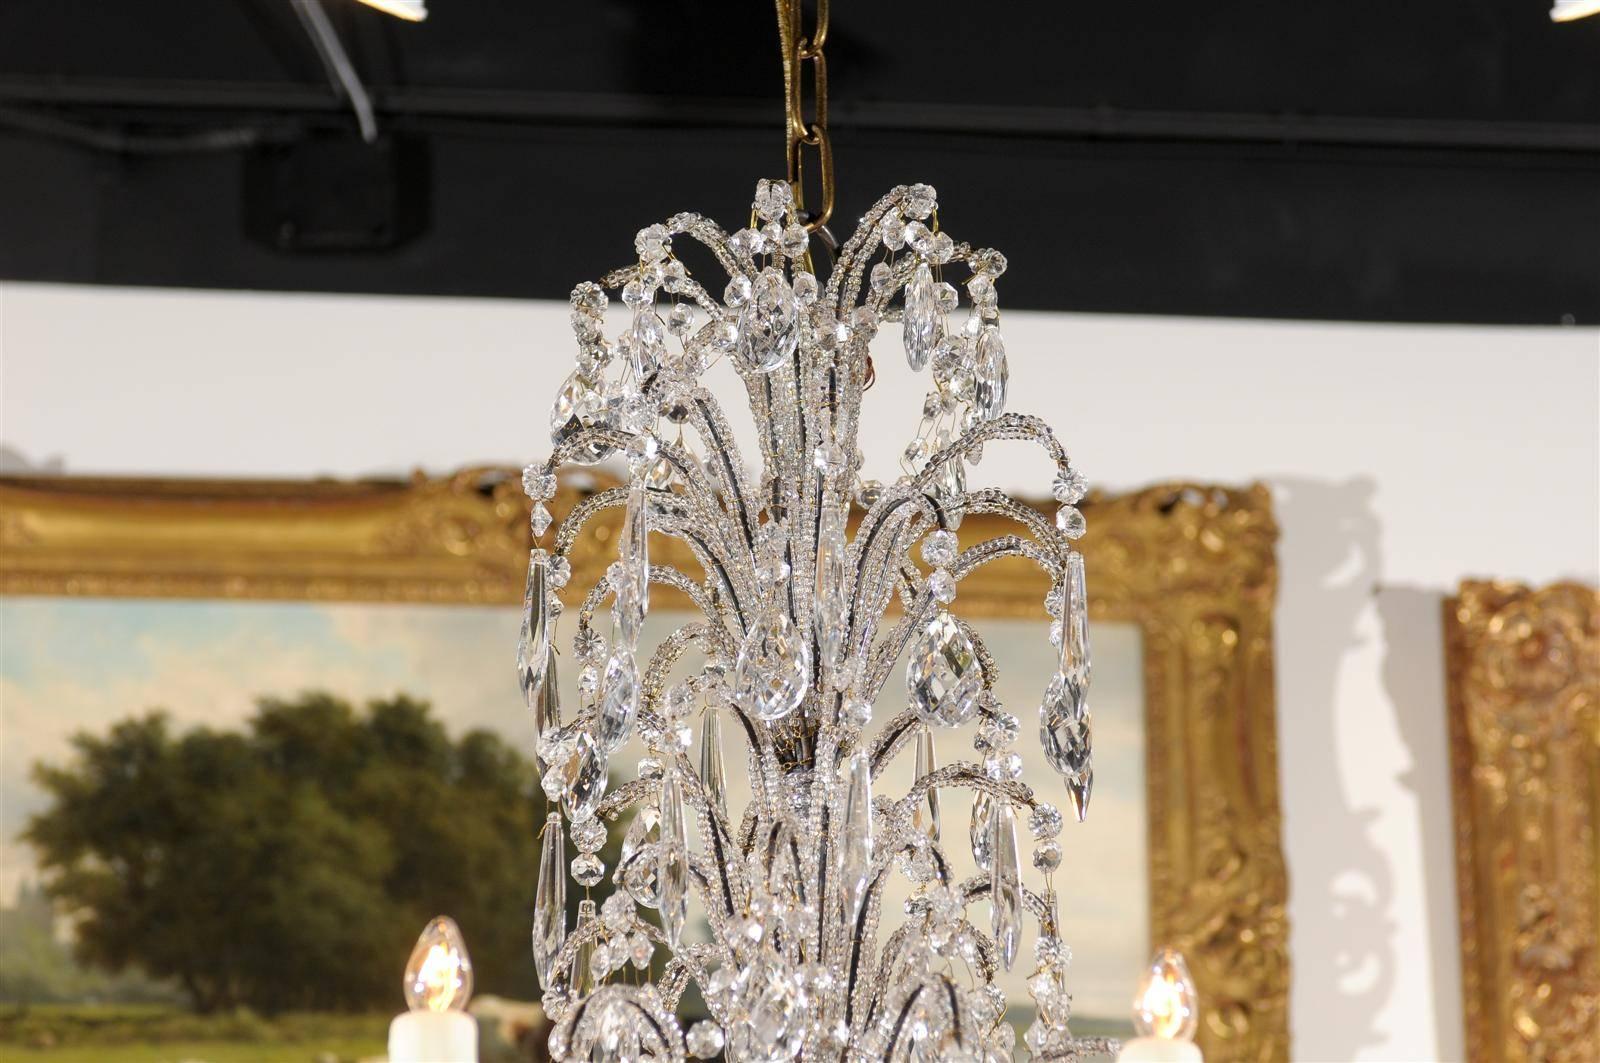 20th Century Italian Crystal Eight-Light Chandelier with Beaded Arms and Giltwood Bobèches